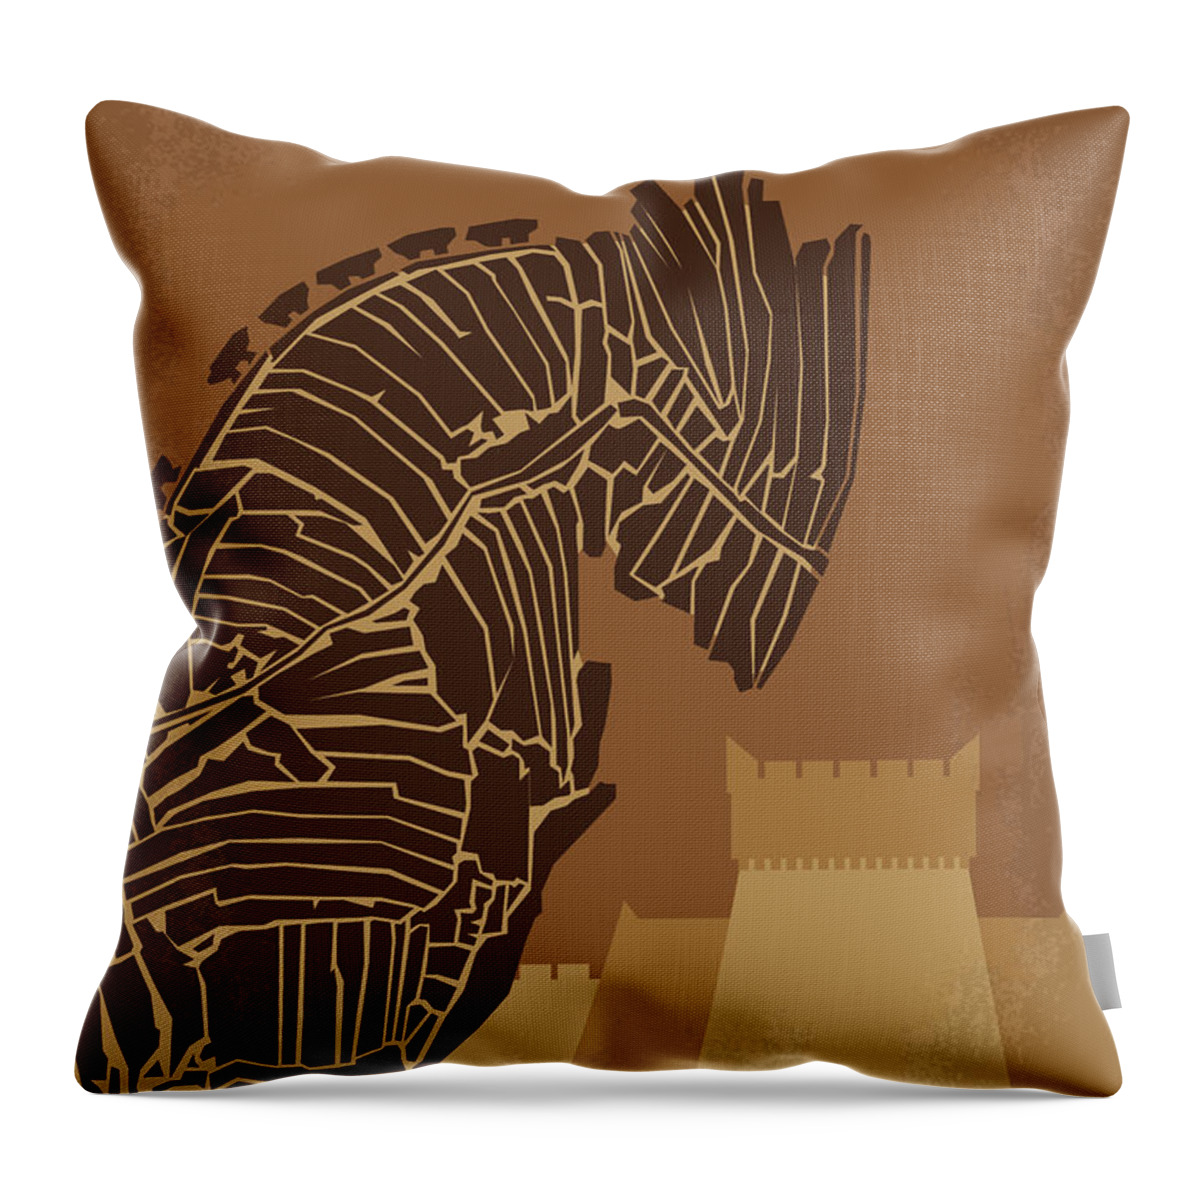 Troy Throw Pillow featuring the digital art No862 My Troy minimal movie poster by Chungkong Art